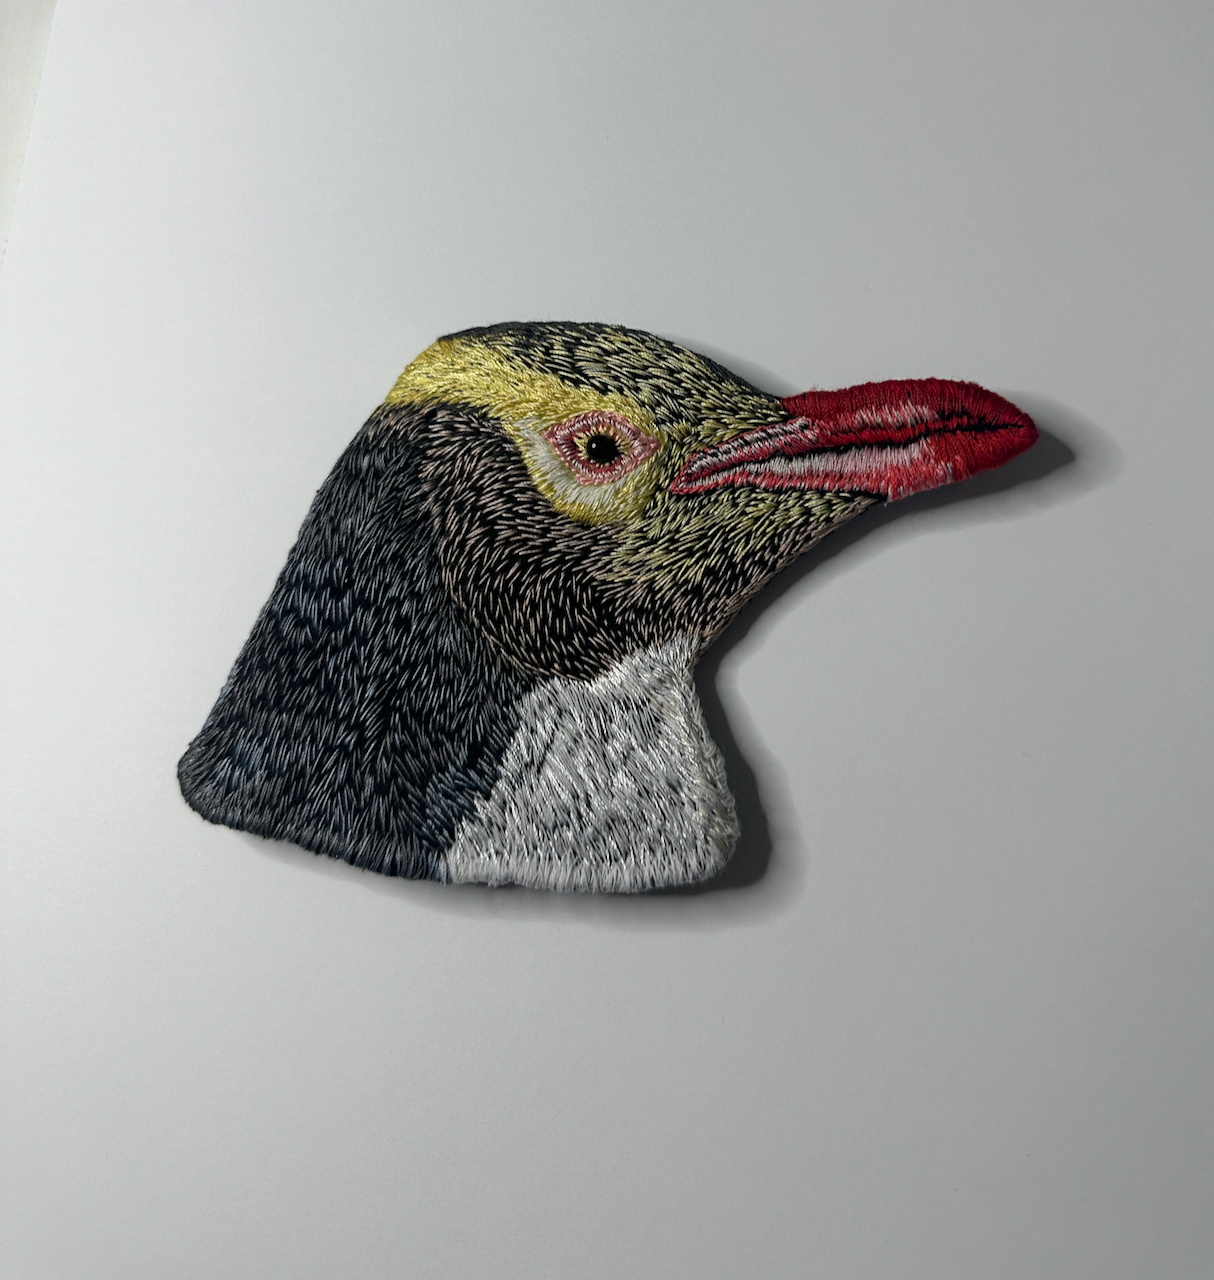 Yellow eyed penguin 'Hoiho'  sculptural embroidery